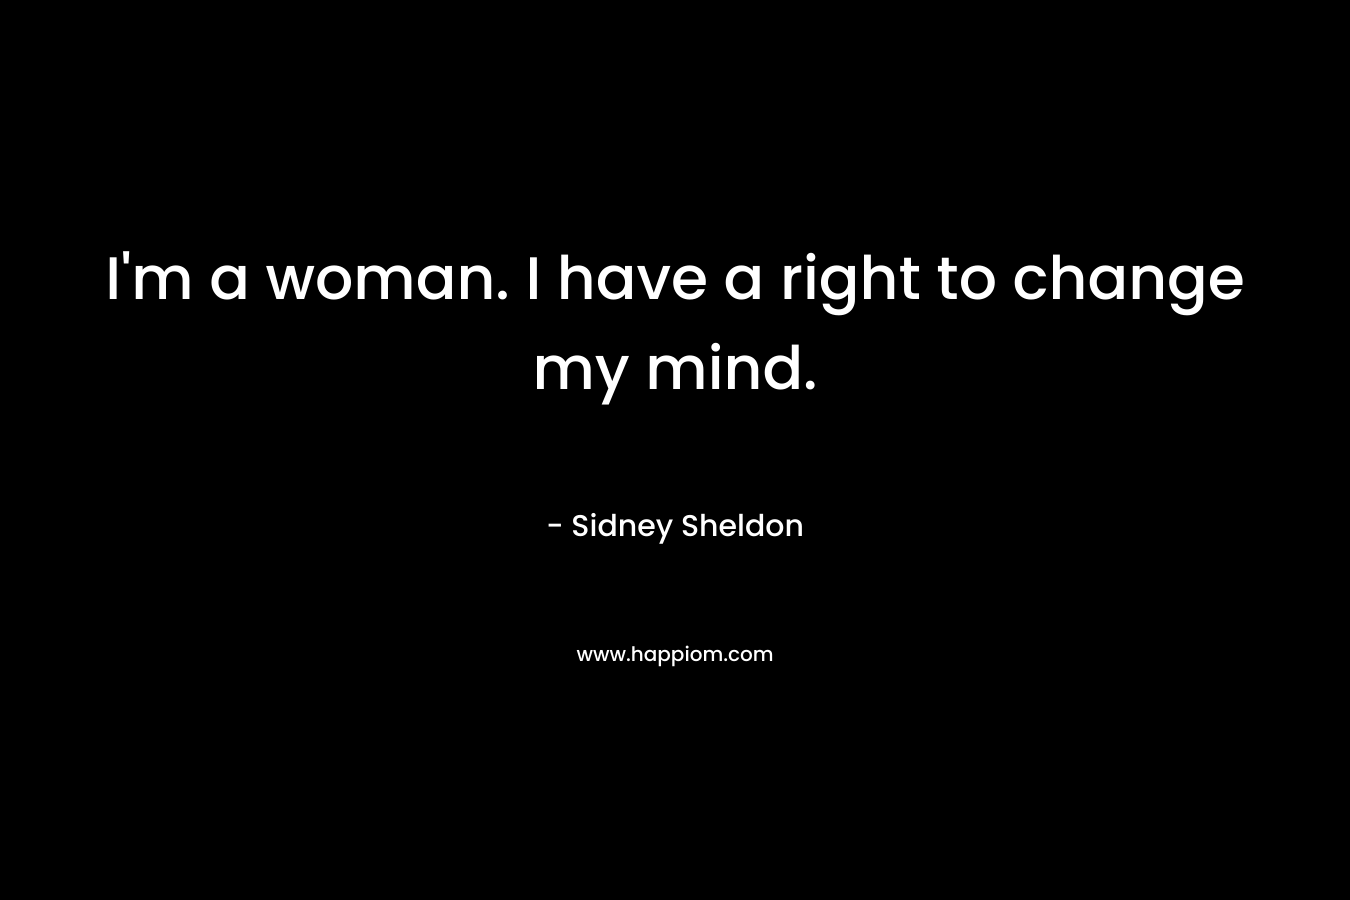 I'm a woman. I have a right to change my mind.